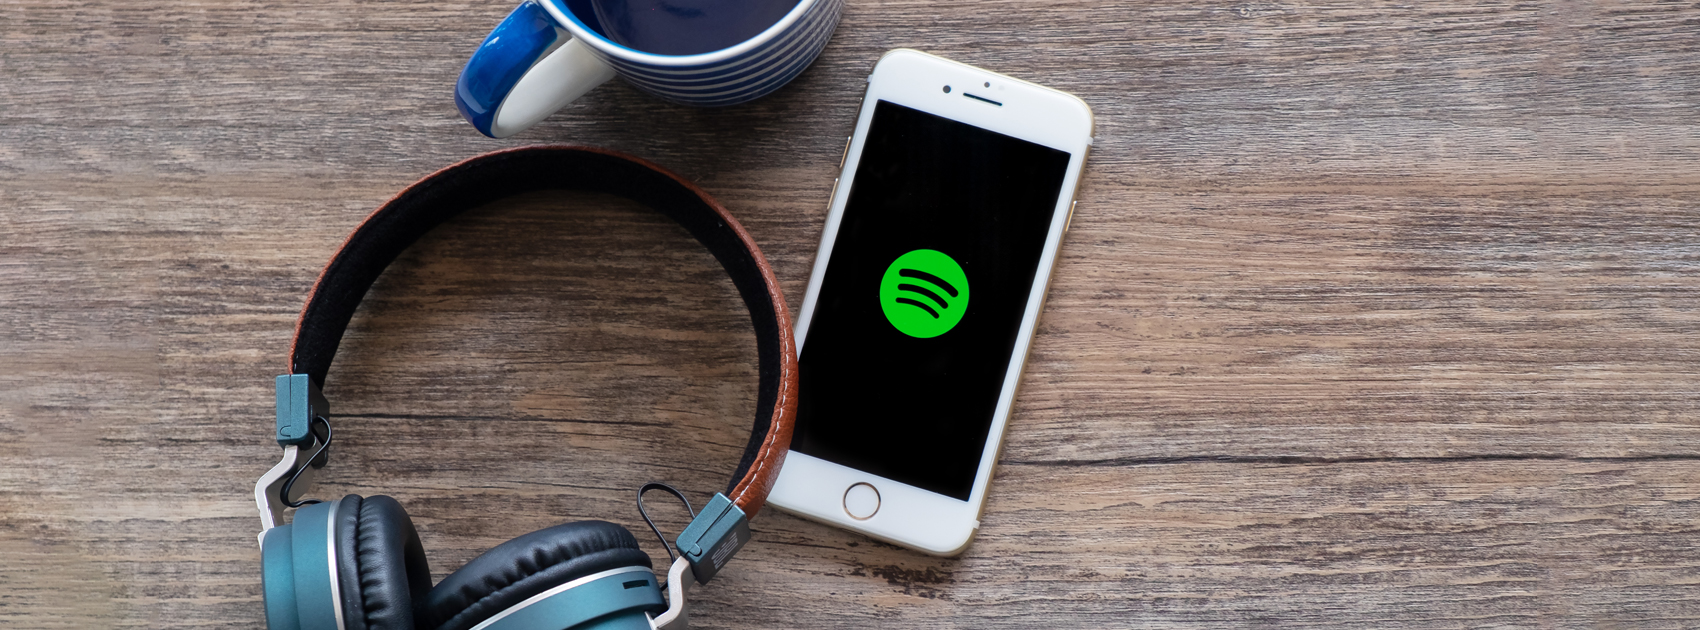 Things You Didn’t Know You Could Do With Spotify,Startup Stories,Latest Business News 2019,Things You Didn't Know About Spotify,Spotify Search Tips,spotify Secrets 2019,Add non Spotify music to app,how to use spotify india,spotify marketing strategy 2019